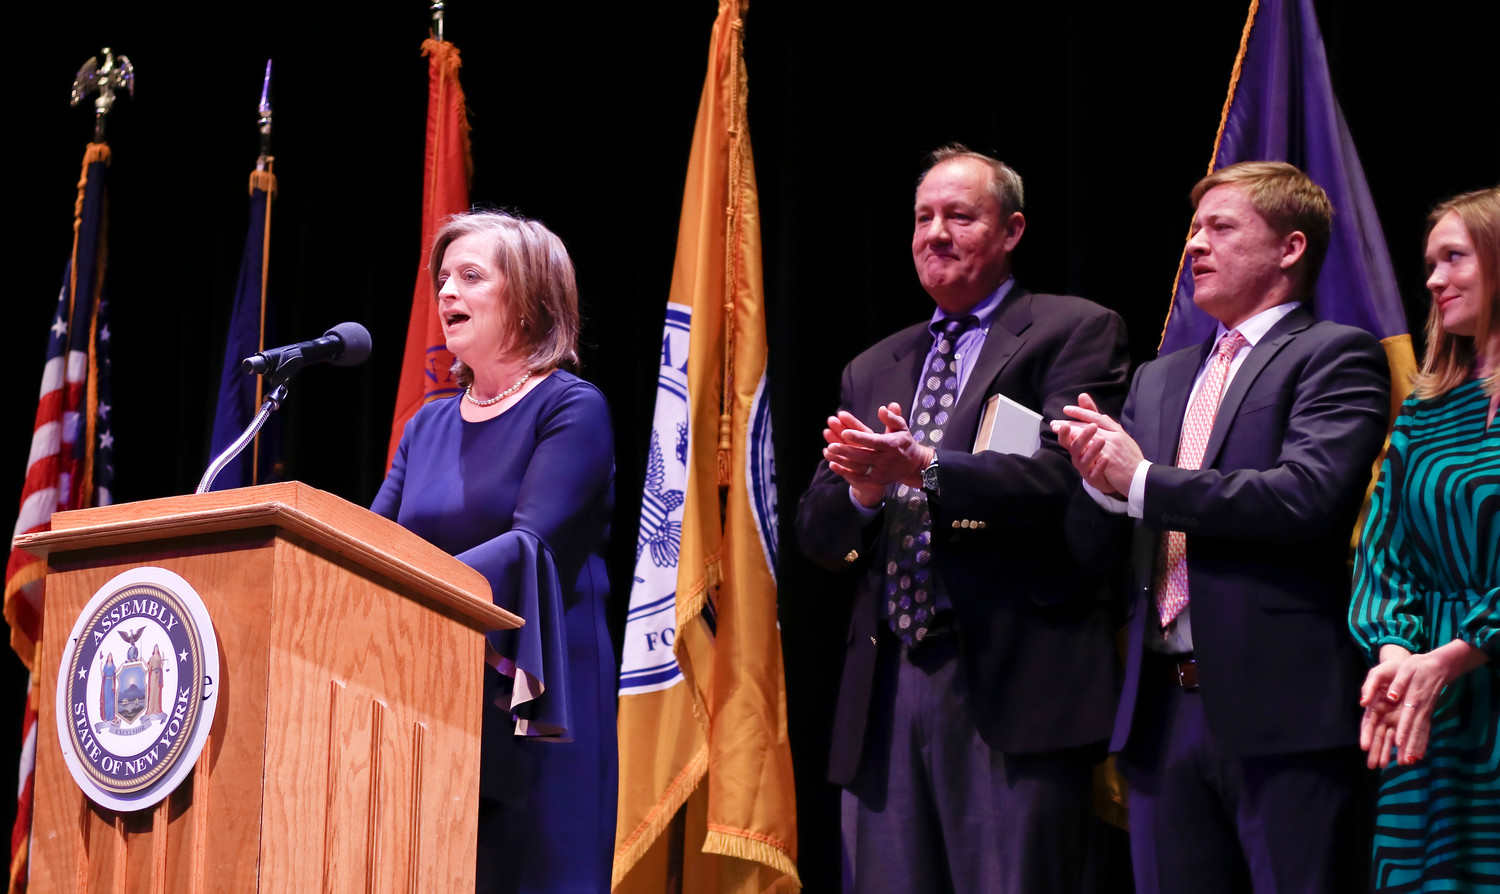 State Assemblywoman Judy Griffin, left, addressed the crowd after being sworn in at Molloy College’s Madison Theatre on Jan. 13.